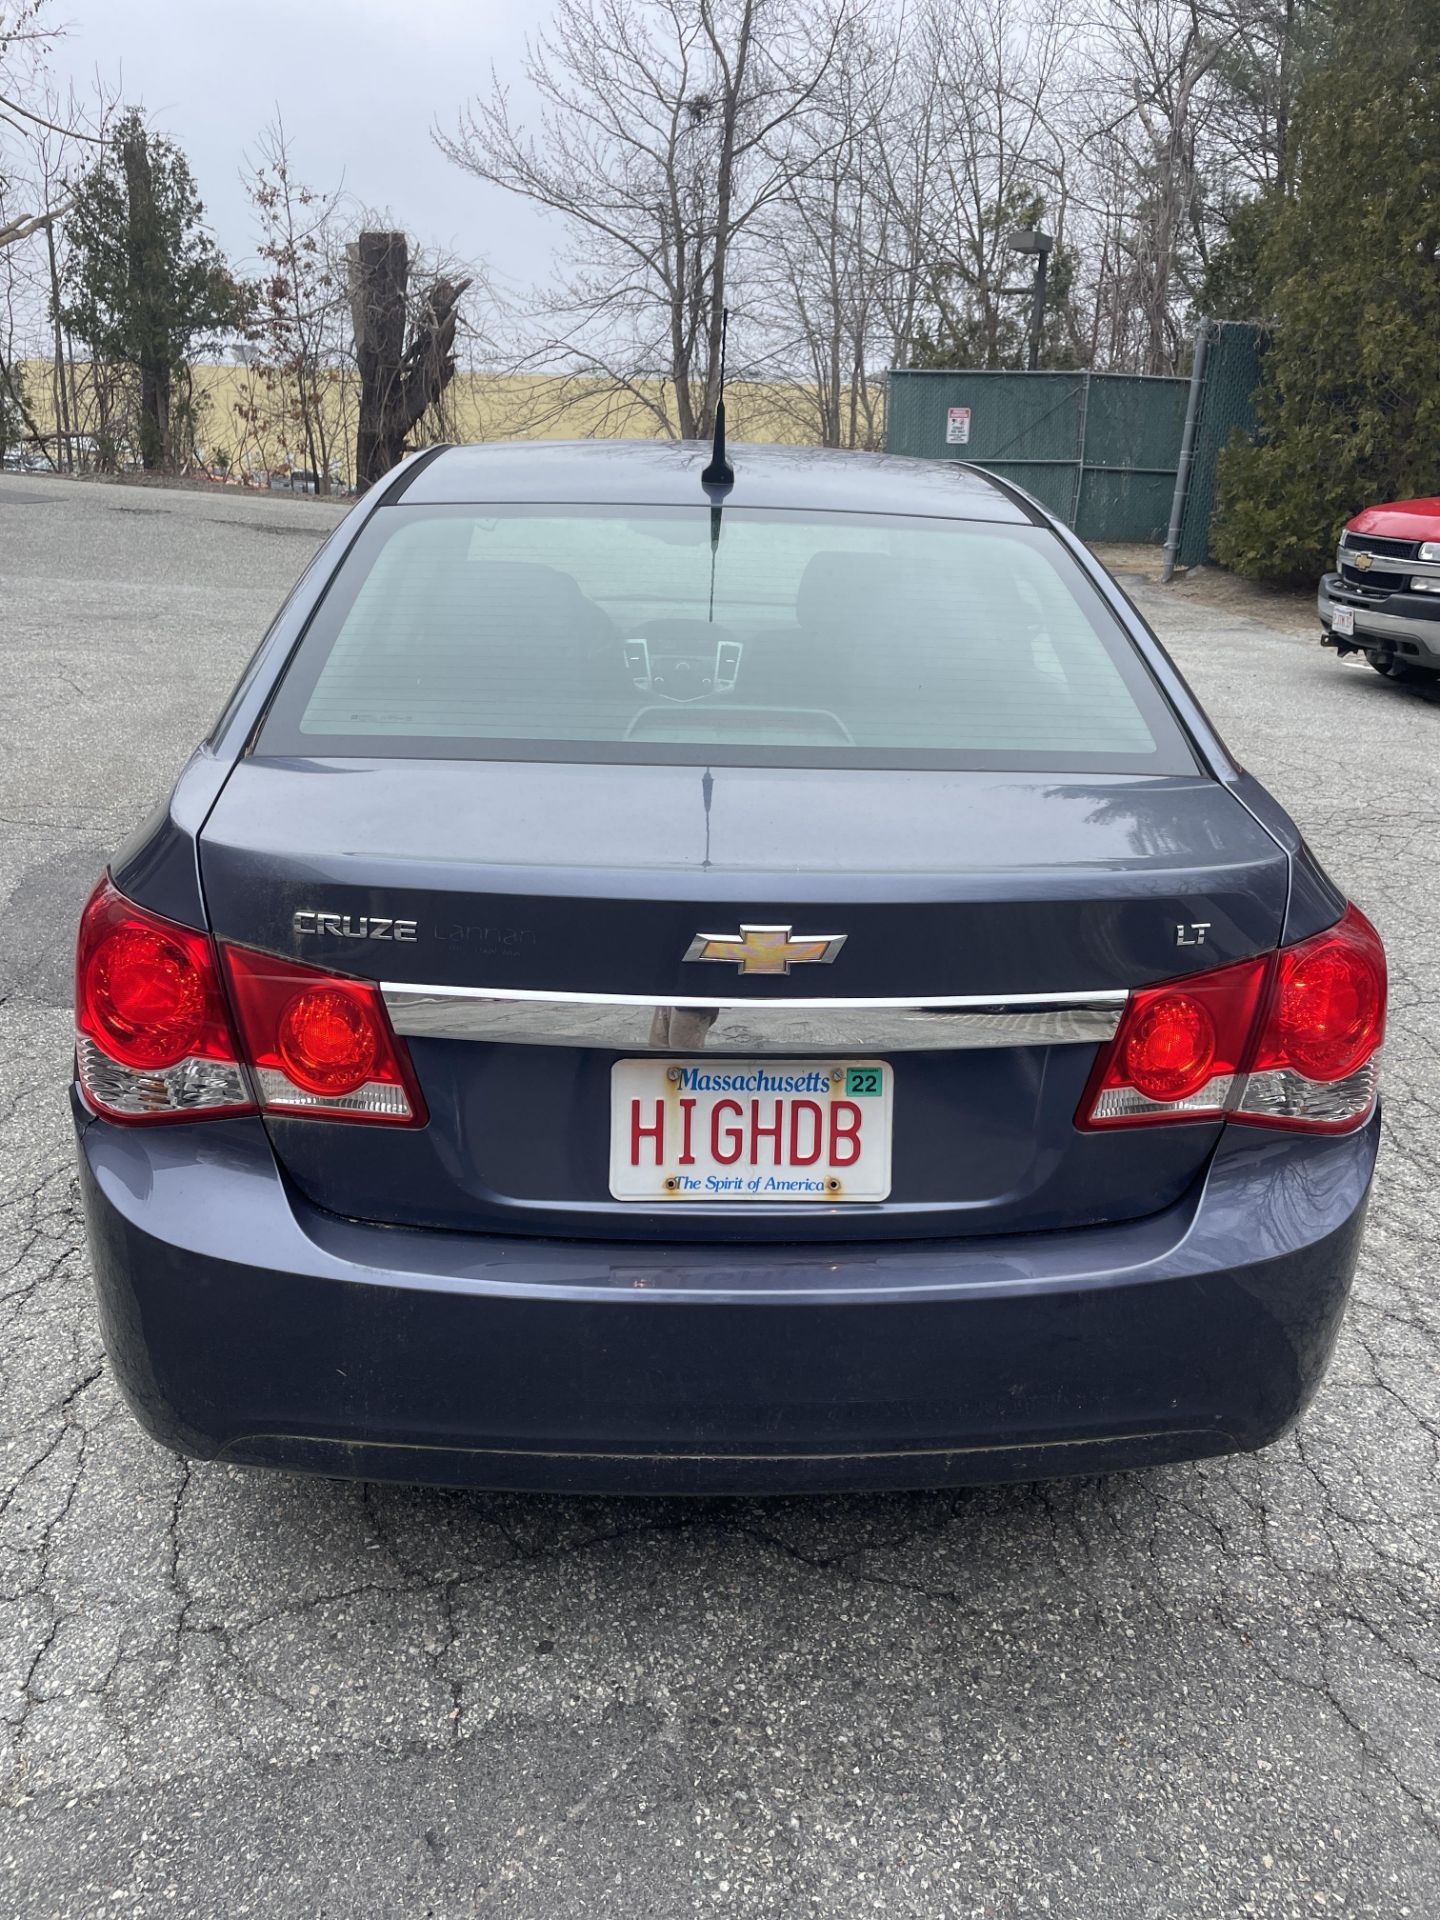 2013 Chevy Cruze Odom: 25,066, Vin:1GC1PC5SB5D7141735 (Has Ceiling Liner Issues) (THIS UNIT CAN'T BE - Image 8 of 16